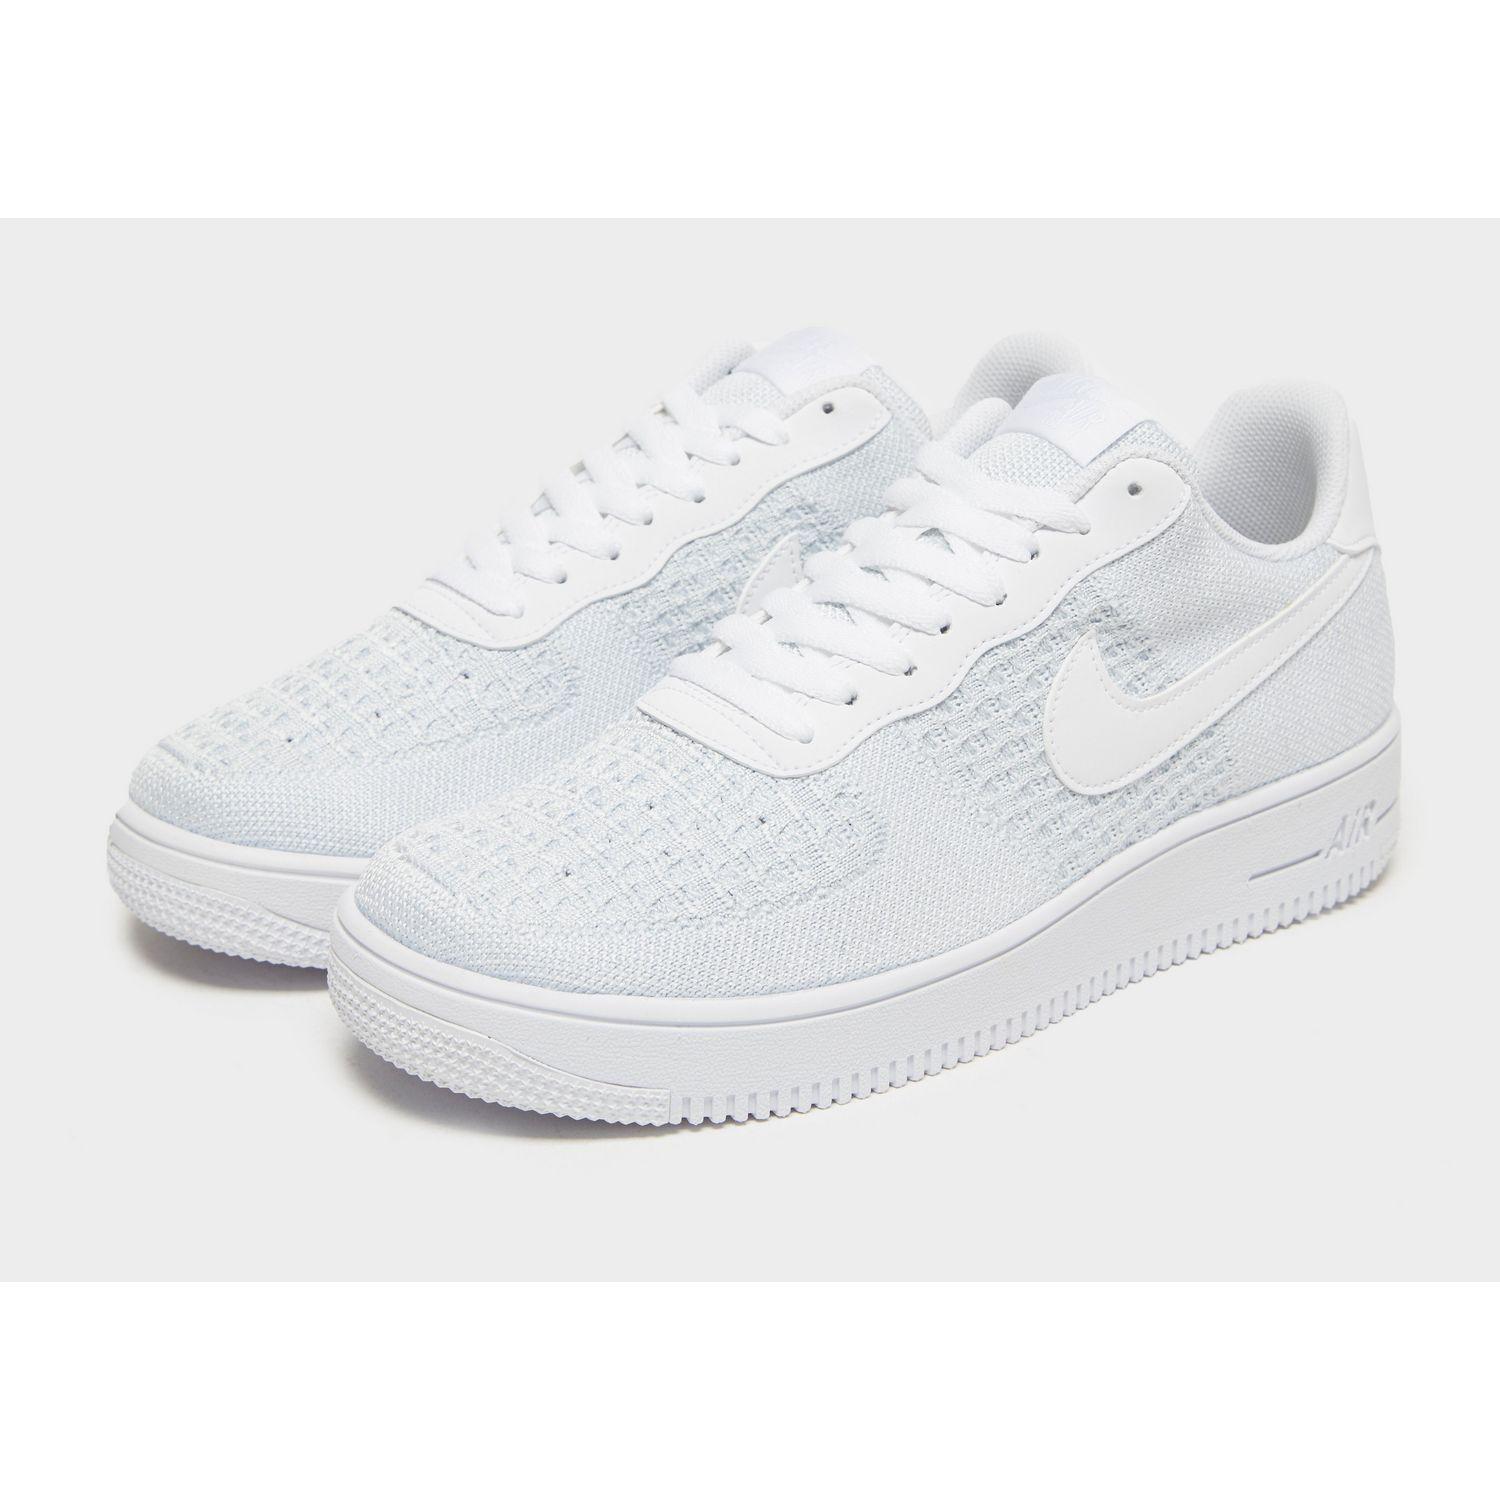 Nike Air Force 1 Flyknit 2.0 in White for Men - Lyst